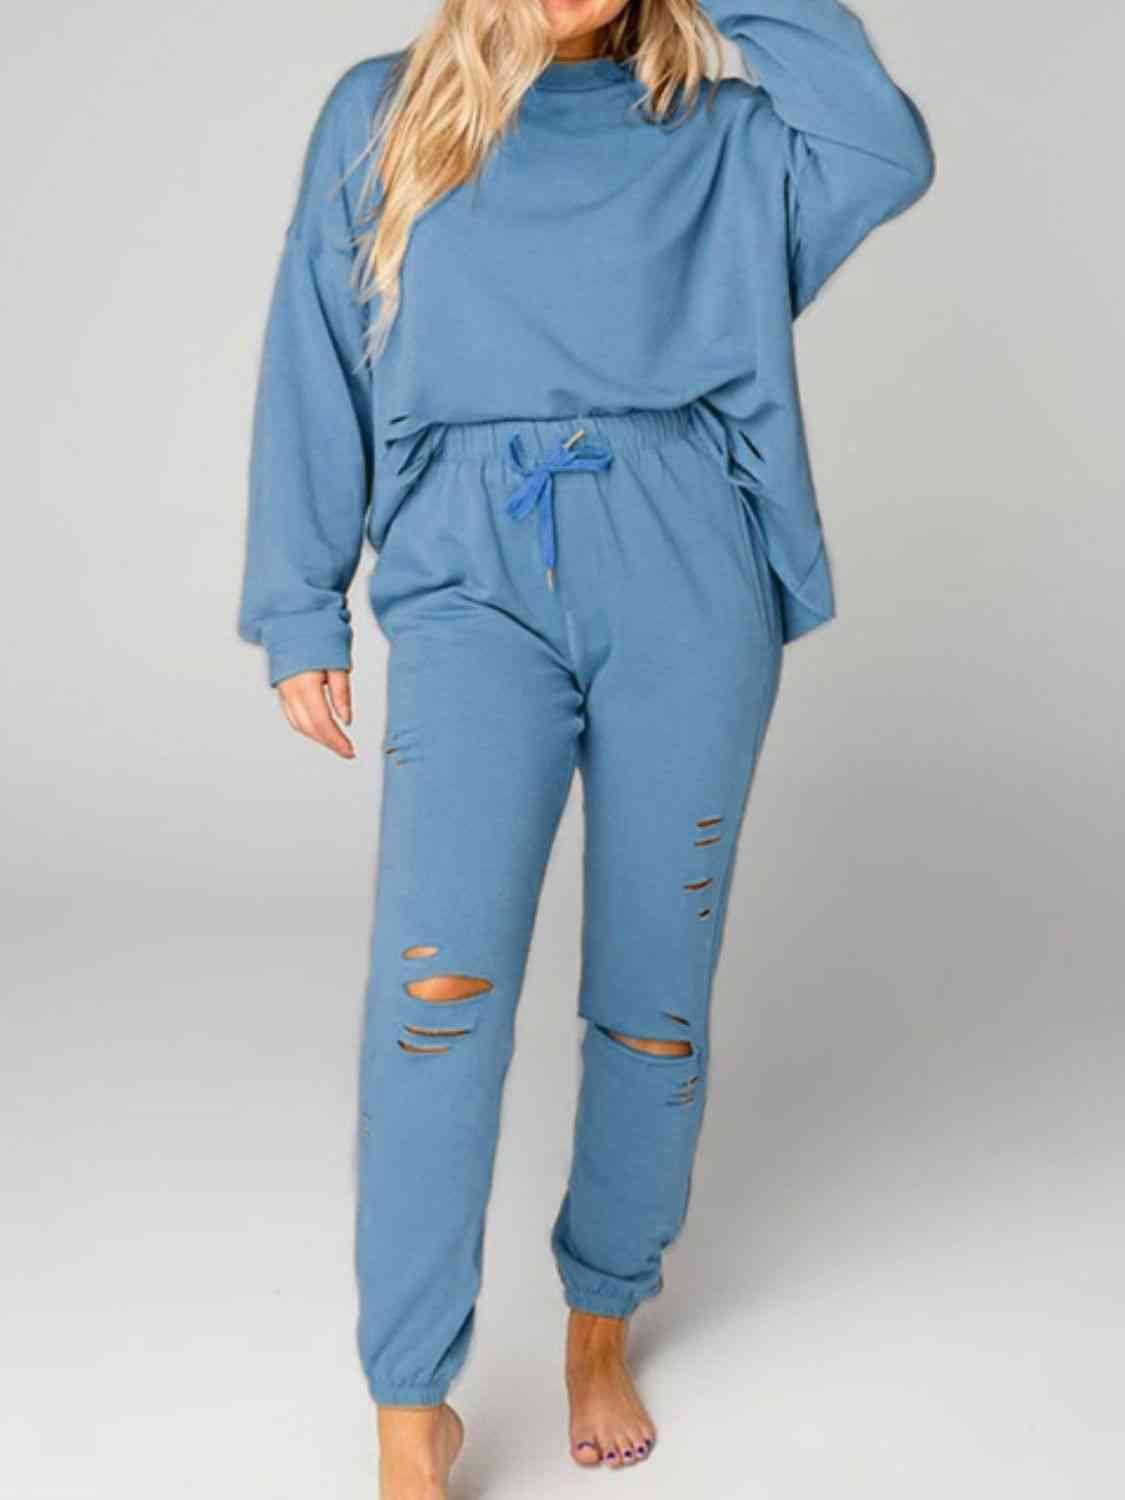 a woman wearing a blue jumpsuit with ripped knees